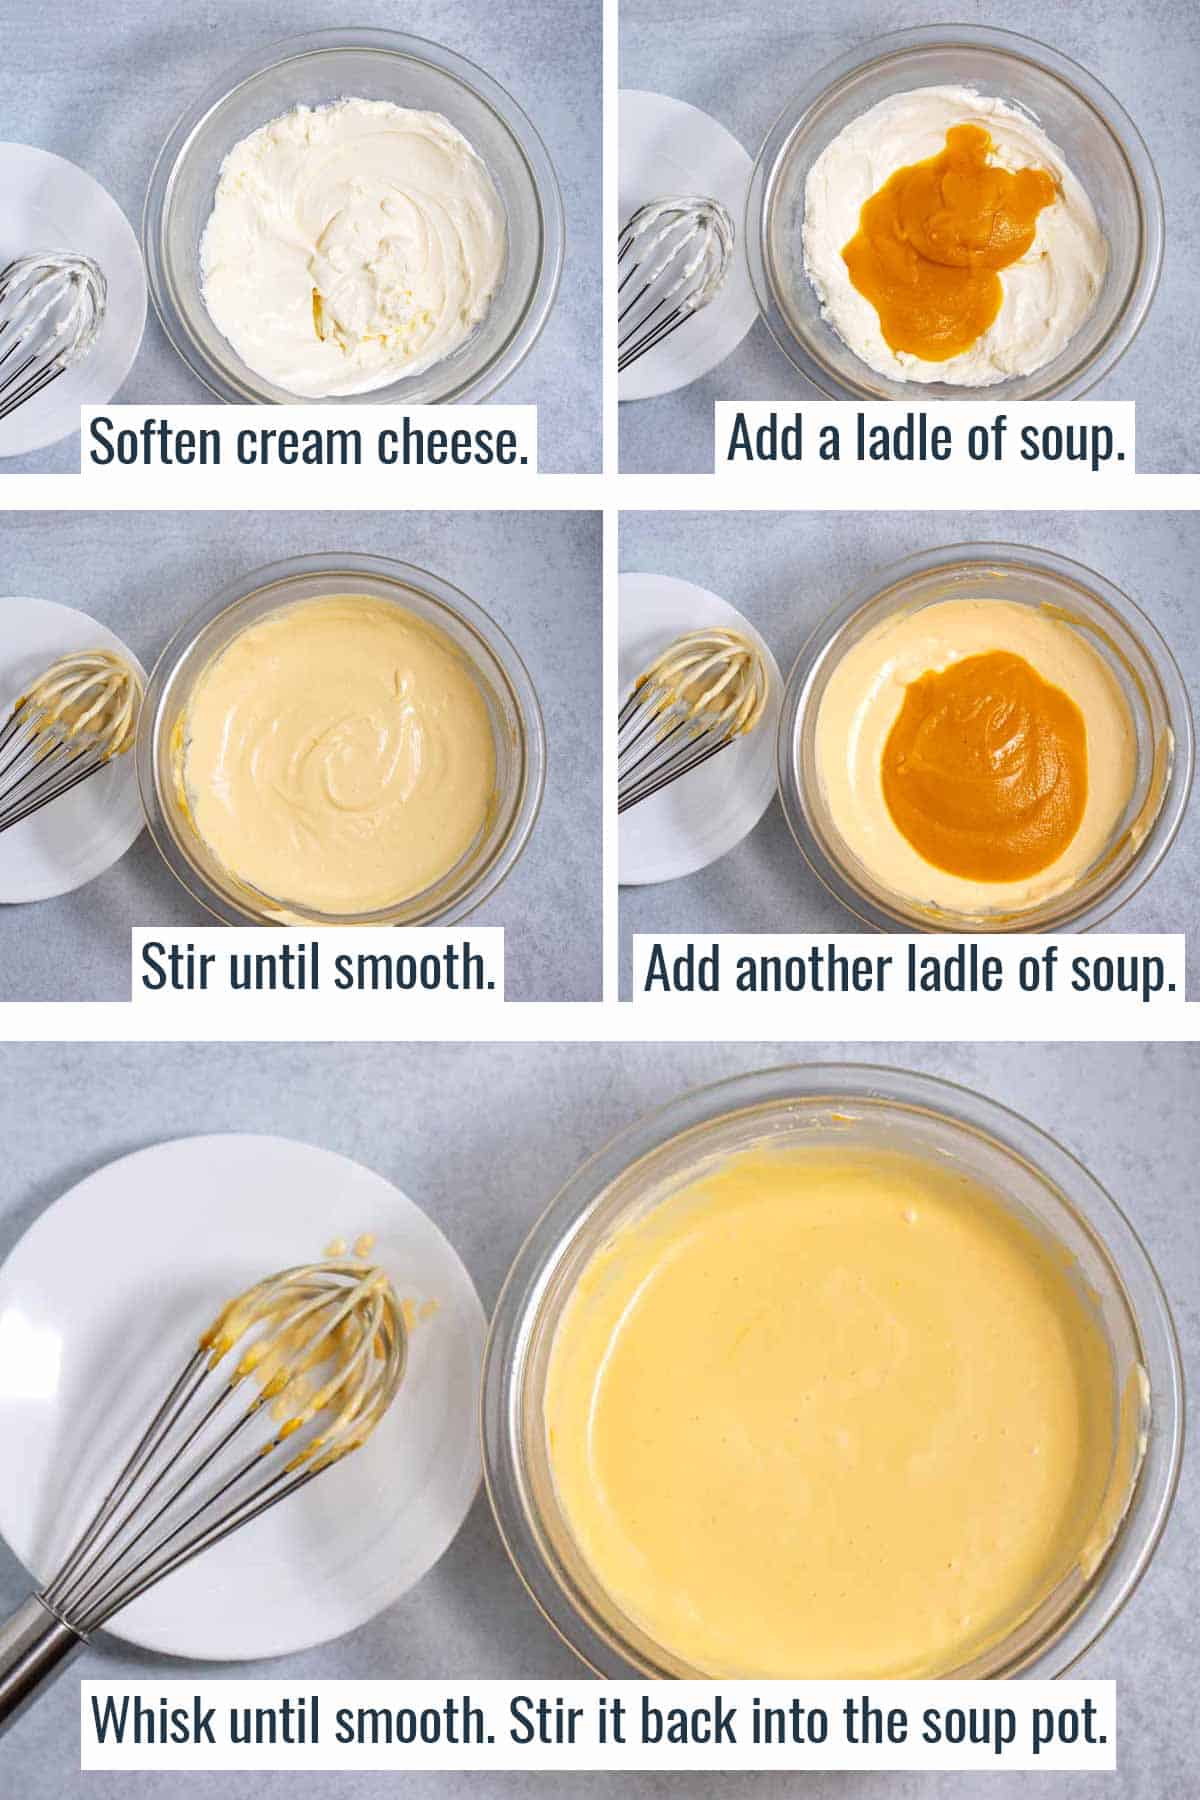 Steps showing softening cream cheese. Then whisking some soup into the cream cheese and stirring until smooth.